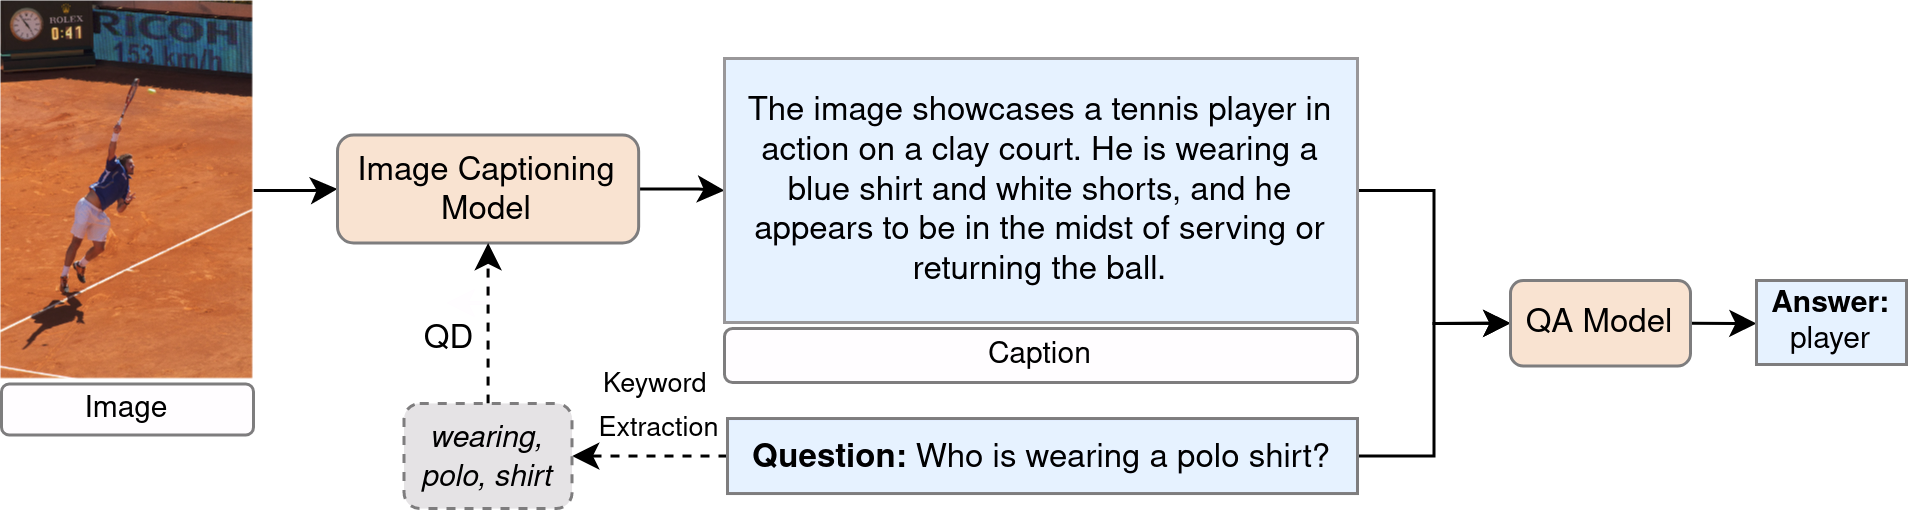 Enhancing Visual Question Answering through Question-Driven Image Captions as Prompts